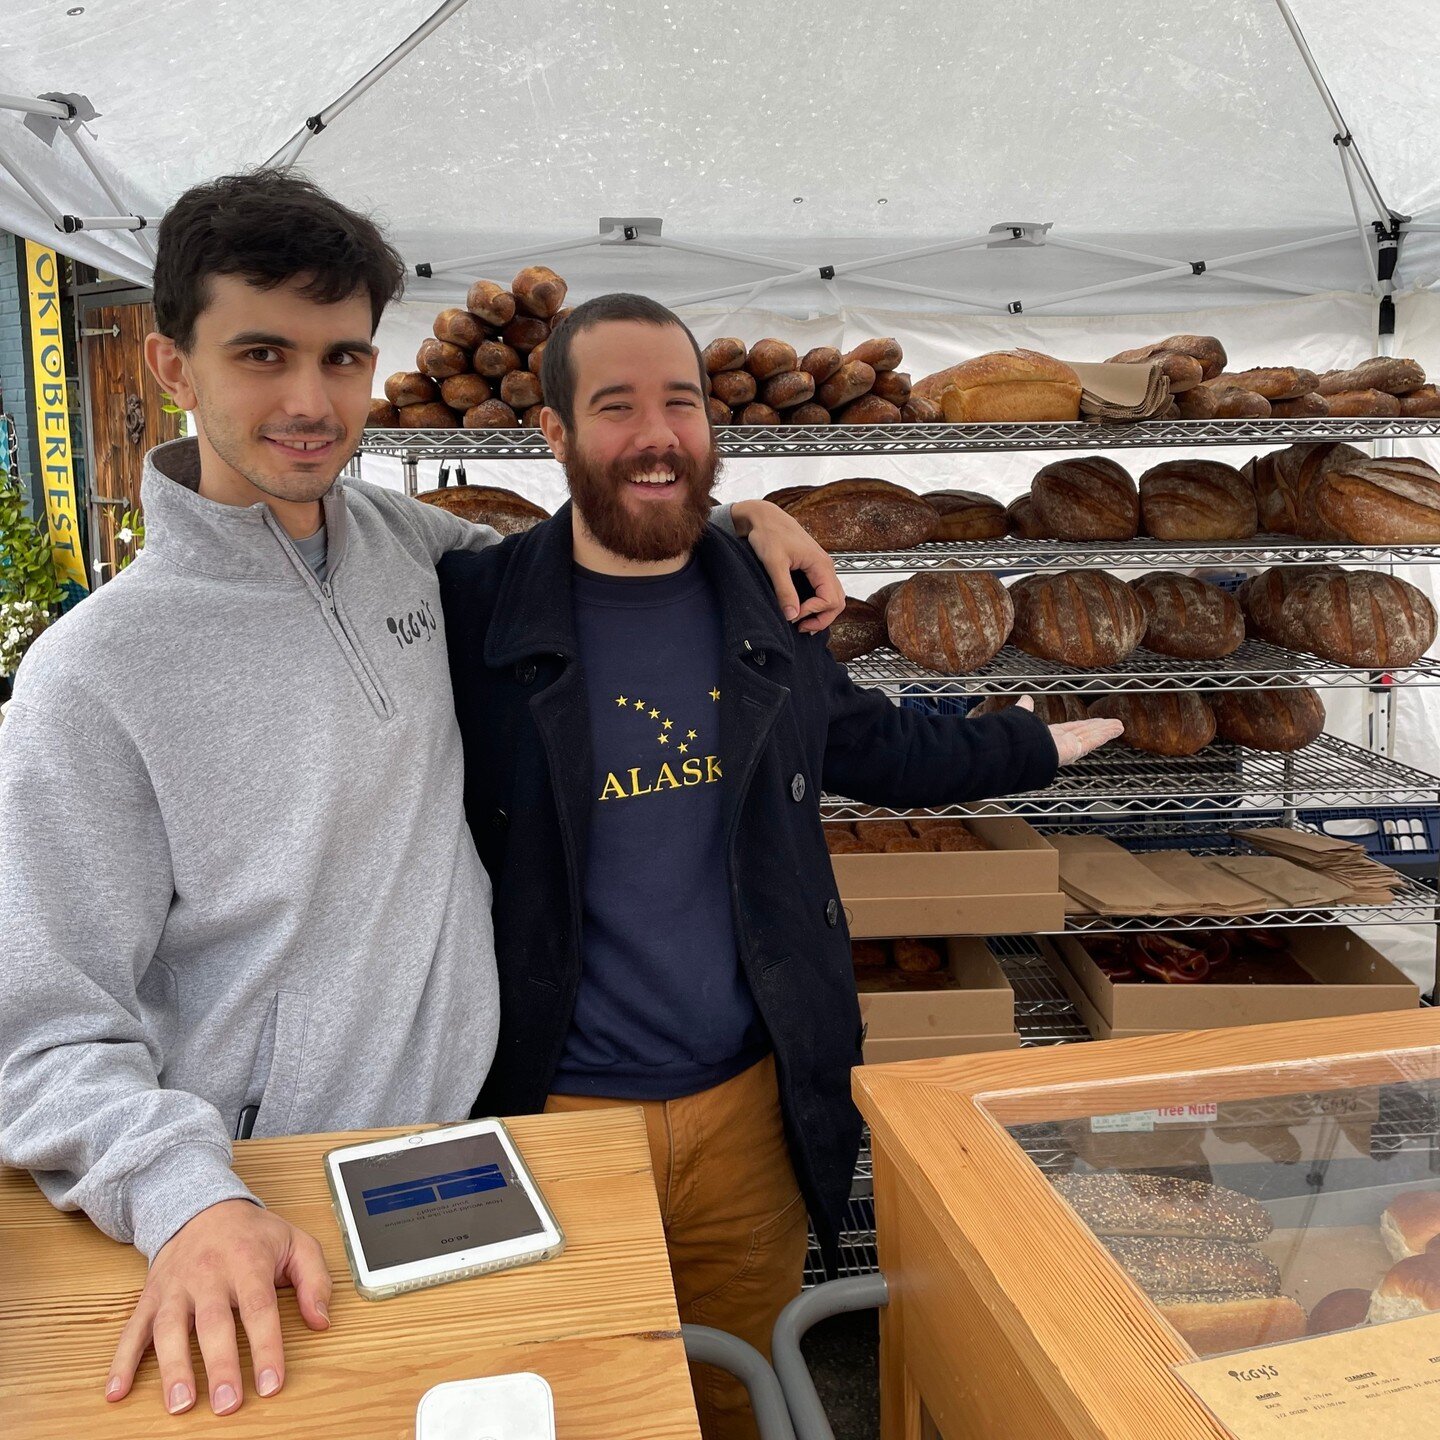 Shots from last weekend's rainy market day 🌧️☂️ Thanks to all who have shopped the market in all weather this season 💓

Luckily, Saturday's forecast calls for lots of sun ☀️☀️ don't miss out on the last USFM of the season this Saturday, October 28!